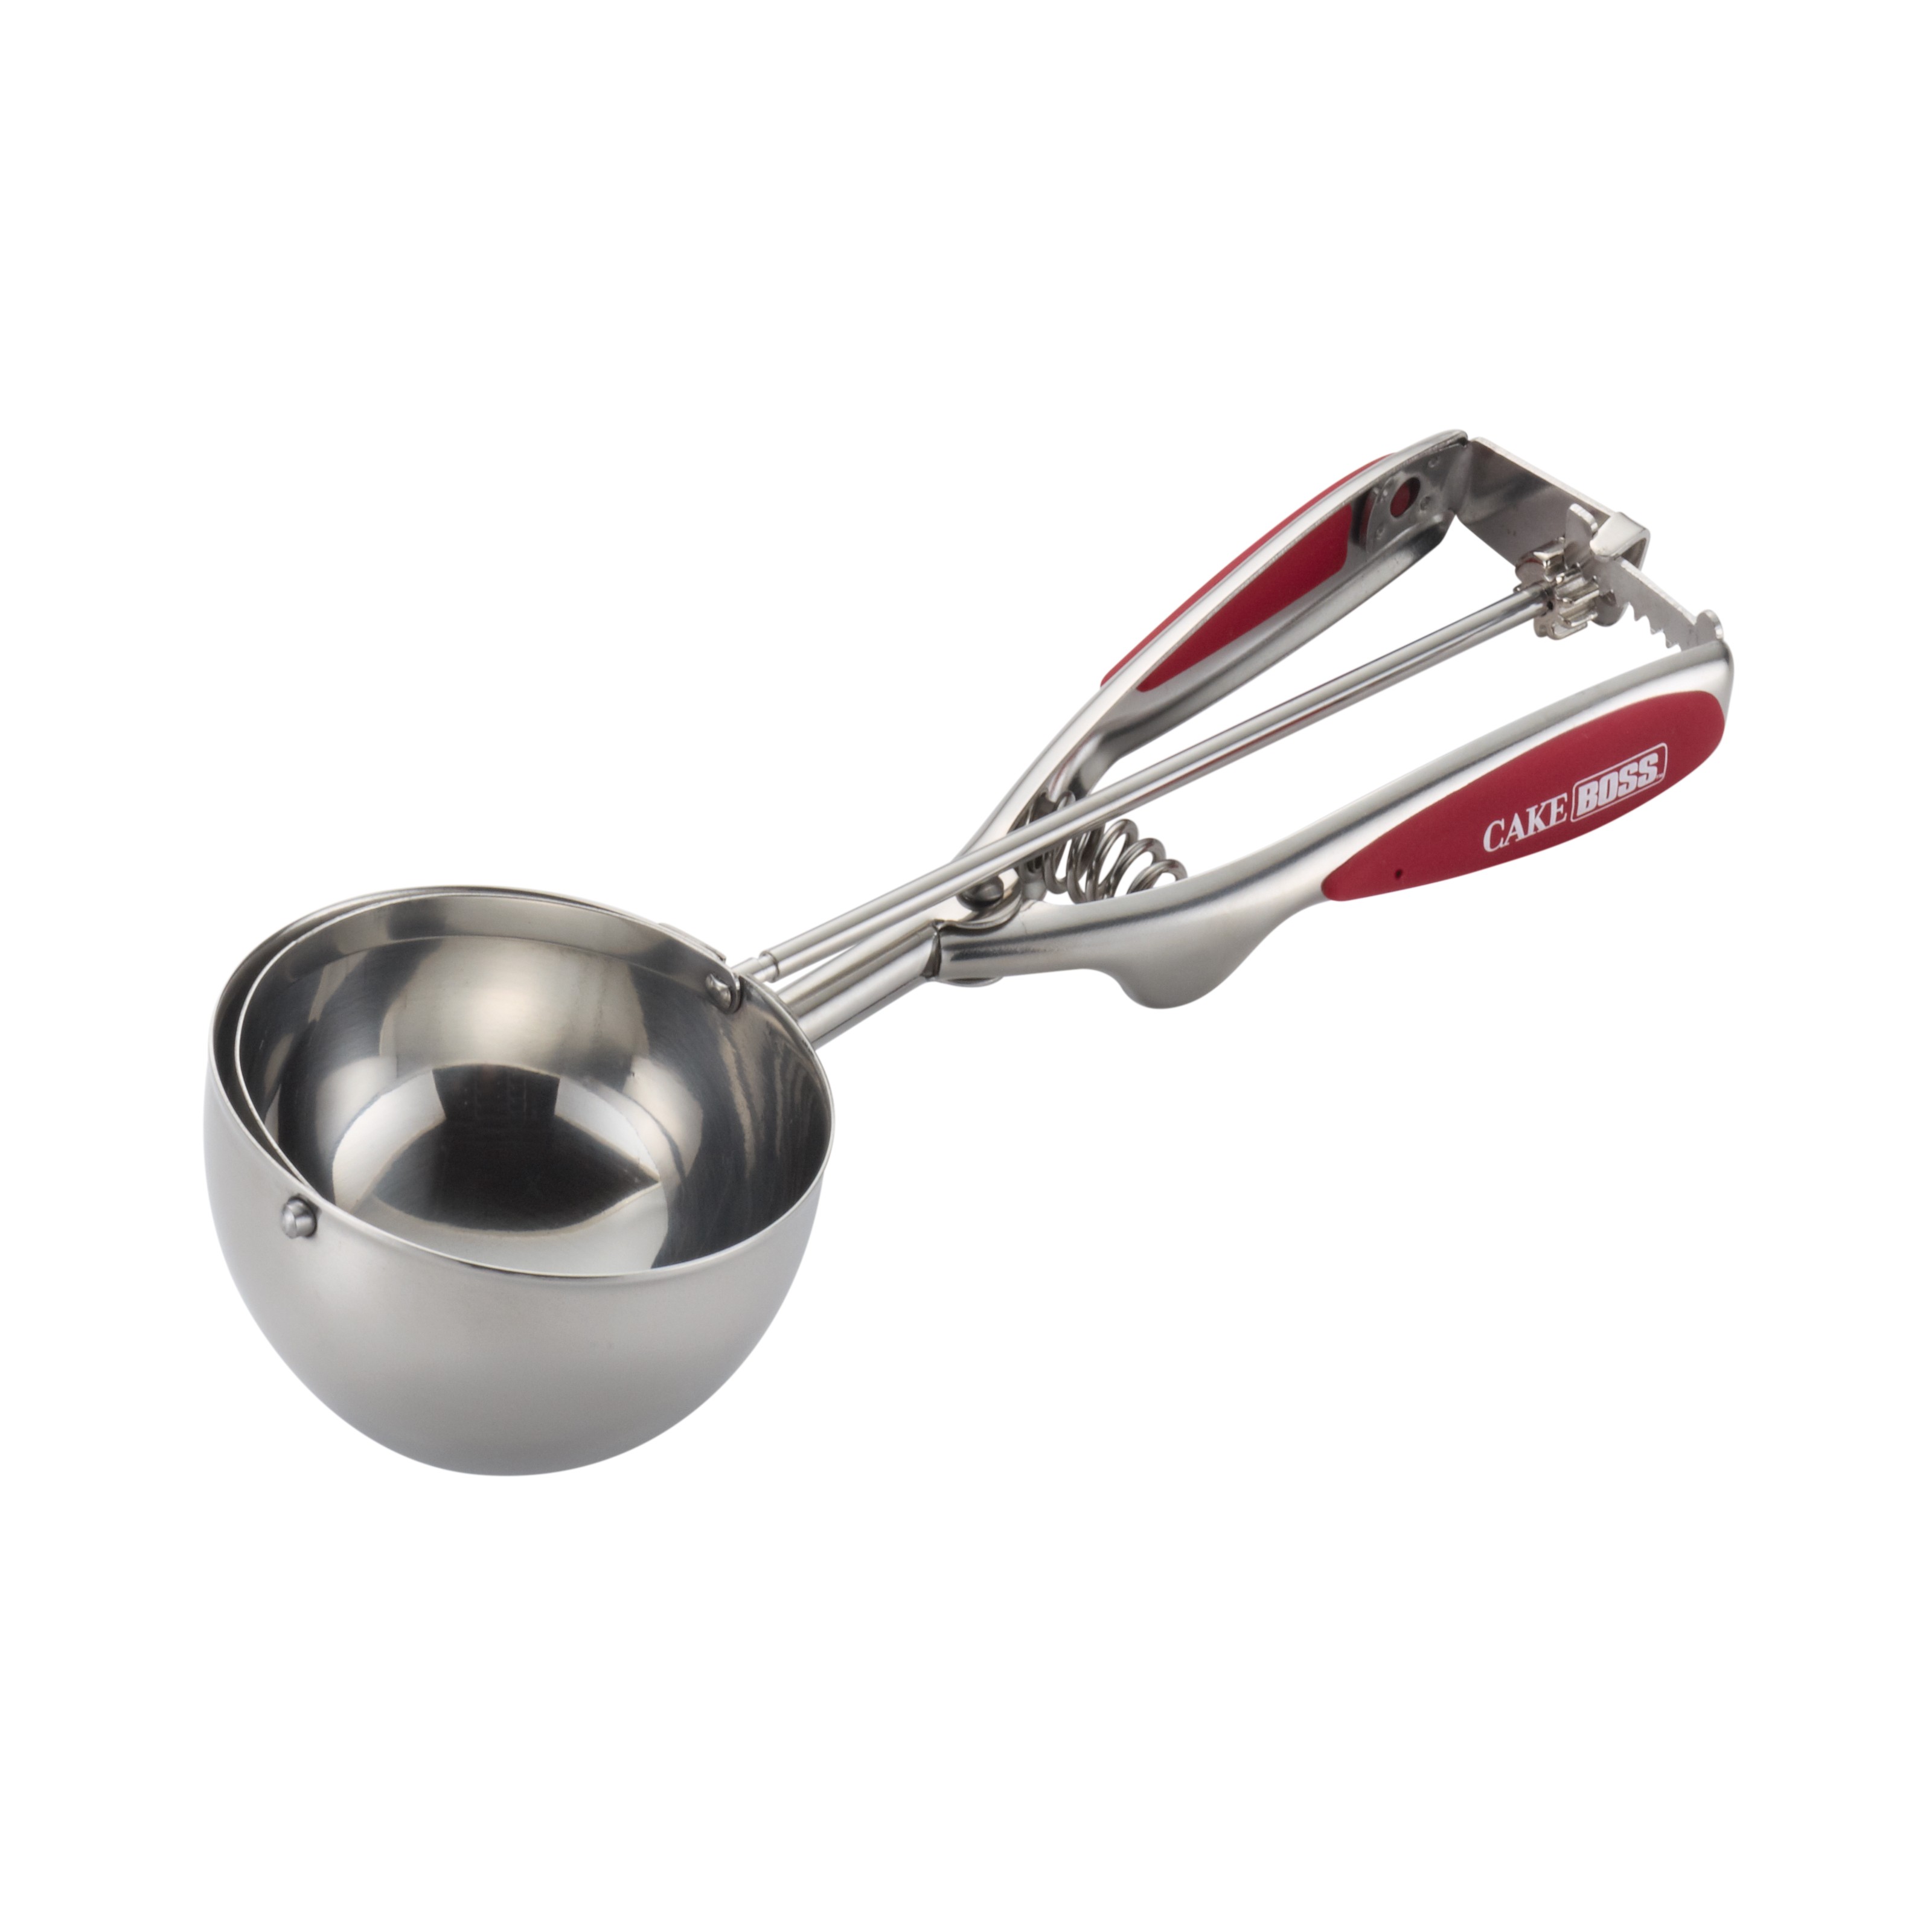 Carlo's Bakery - Mechanical Ice Cream Scoop with Red Silicone Grips